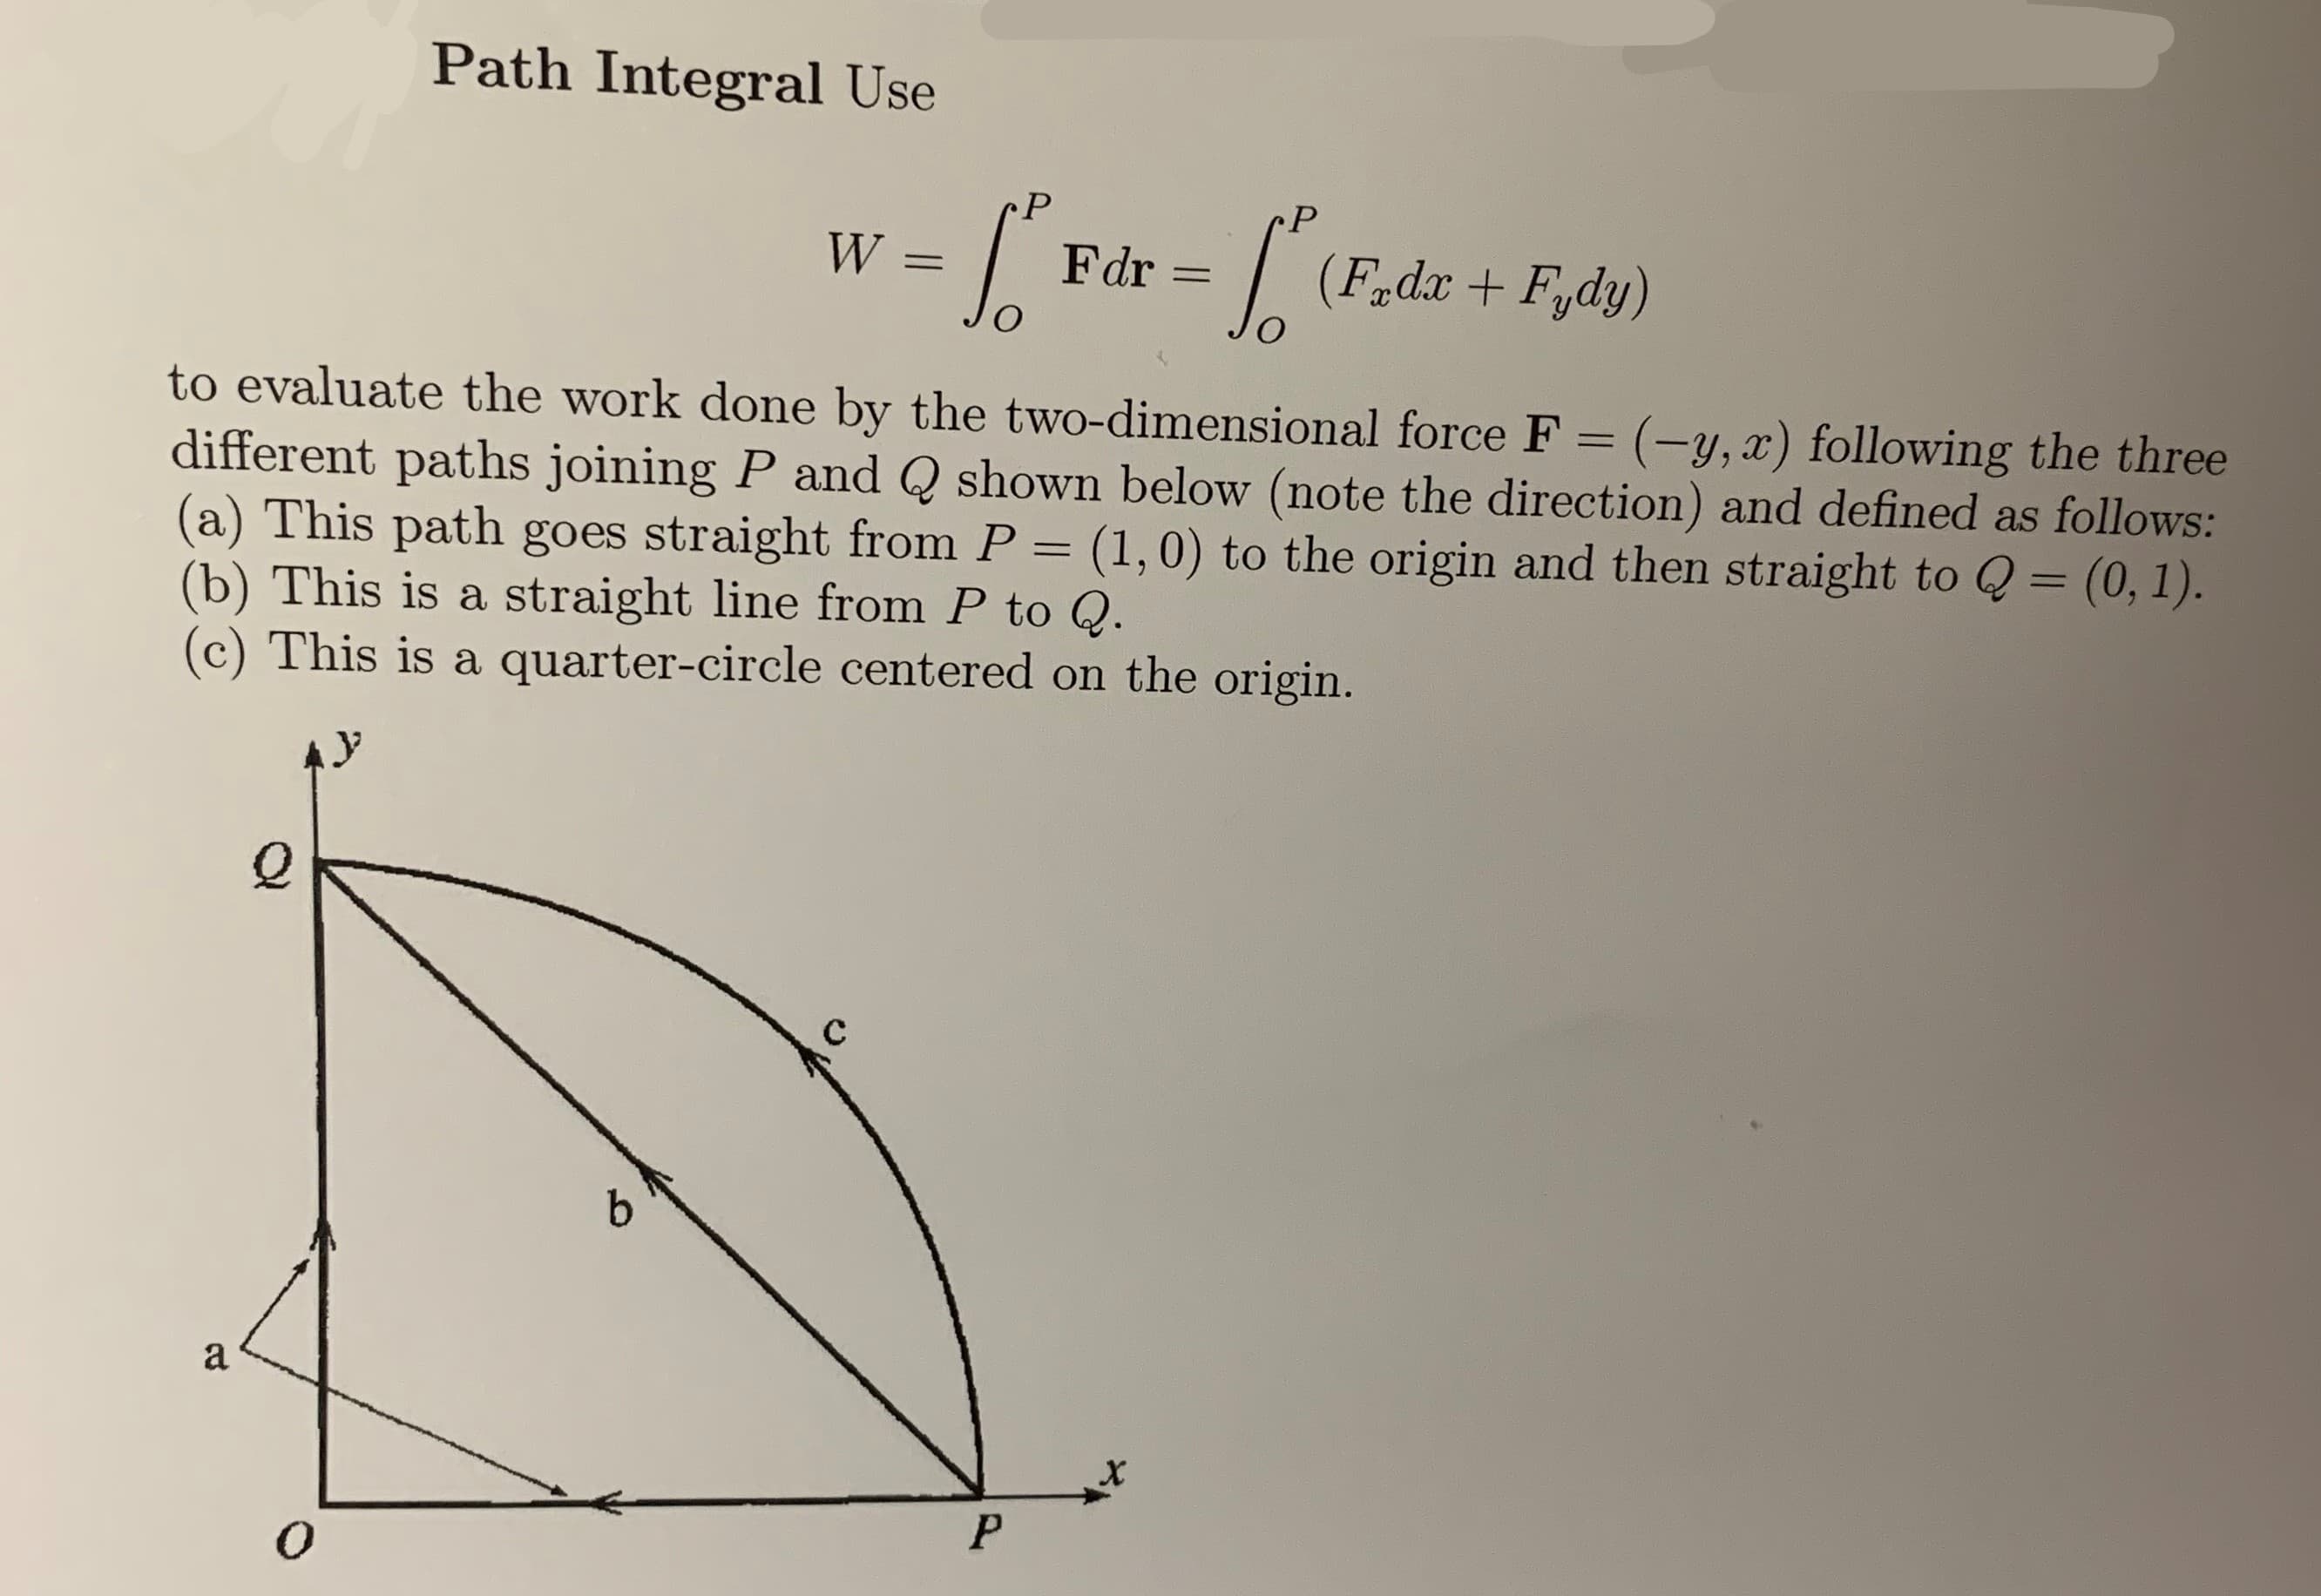 Path Integral Use
P
P
W
Fdr
(Fir dx+ Fydy)
1
to evaluate the work done by the two-dimensional force F = (-y, x) following the three
different paths joining P and Q shown below (note the direction) and defined as follows:
(a) This path goes straight from P = (1,0) to the origin and then straight to Q = (0, 1).
(b) This is a straight line from P to Q
(c) This is a quarter-circle centered on the origin.
Q
b
а
P
0
